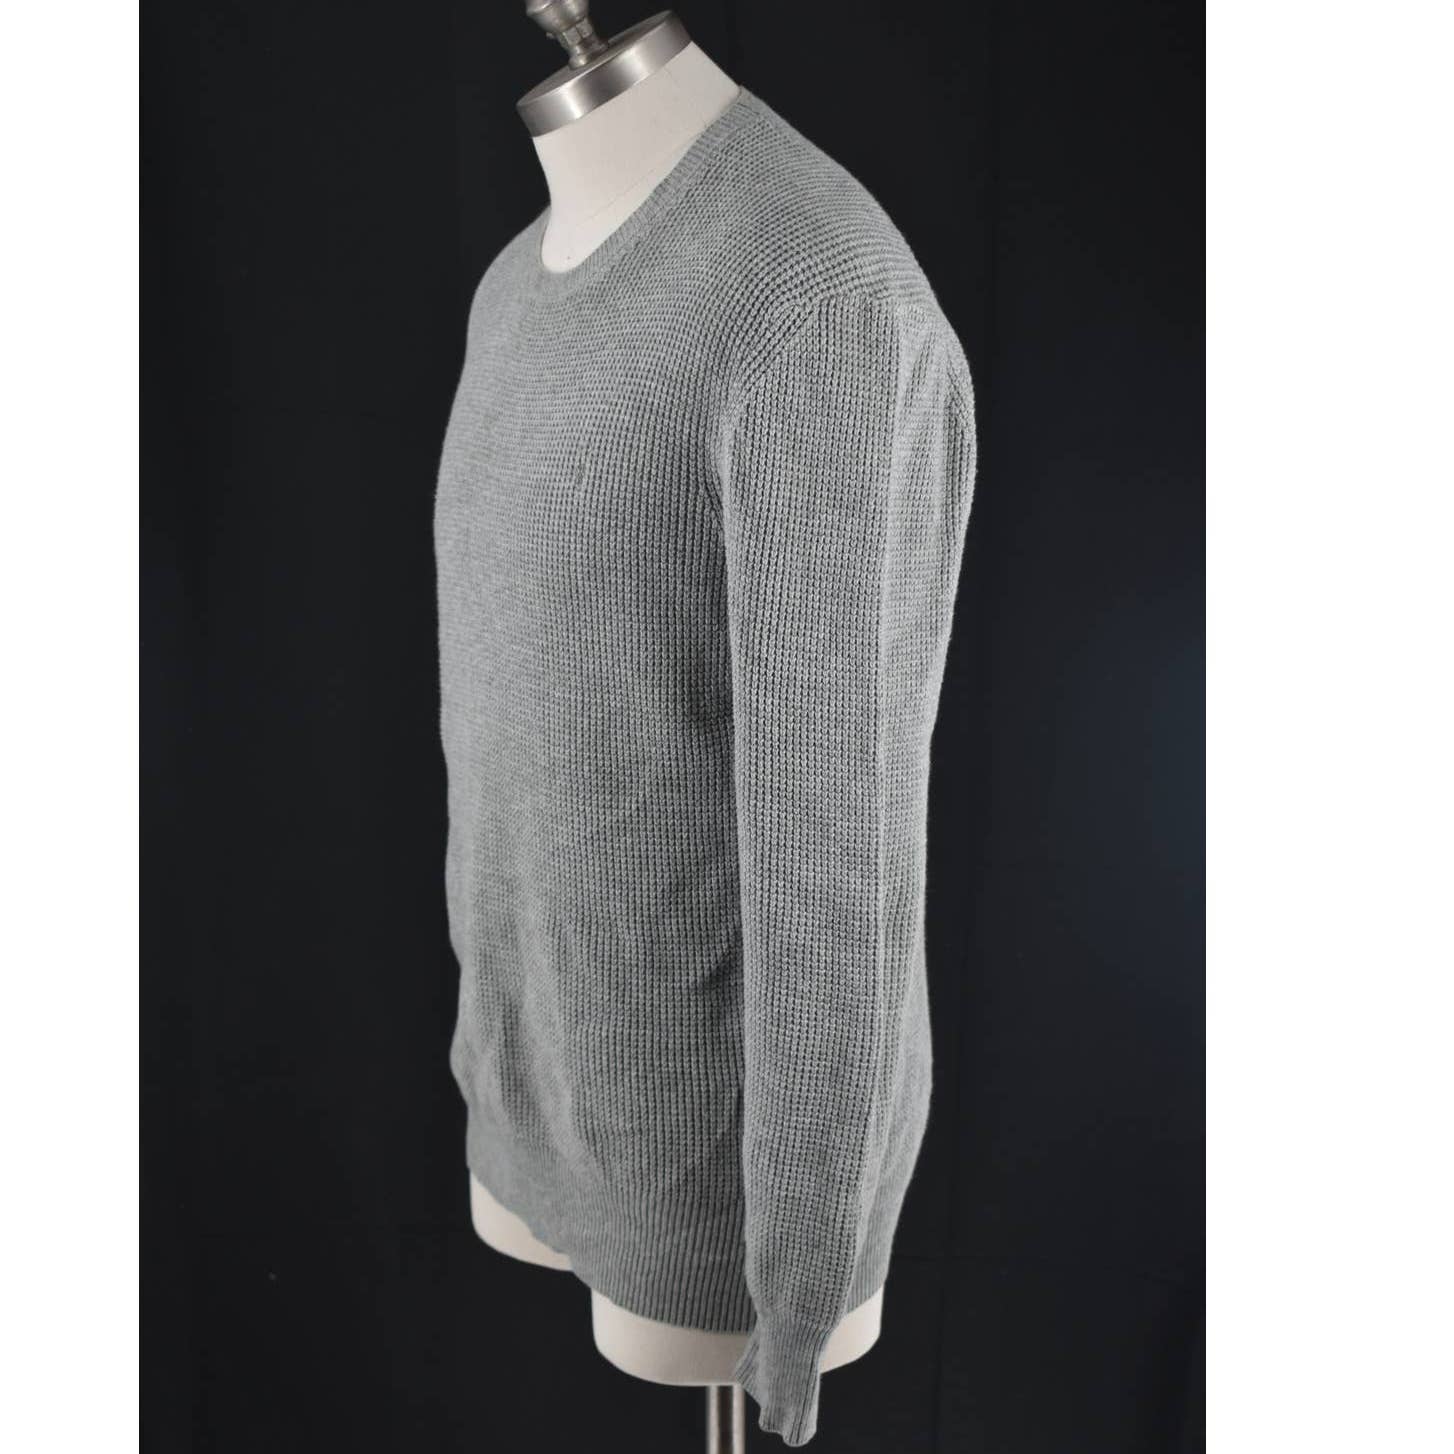 All Saints Gray Thermal Weave Crew Neck Sweater - M